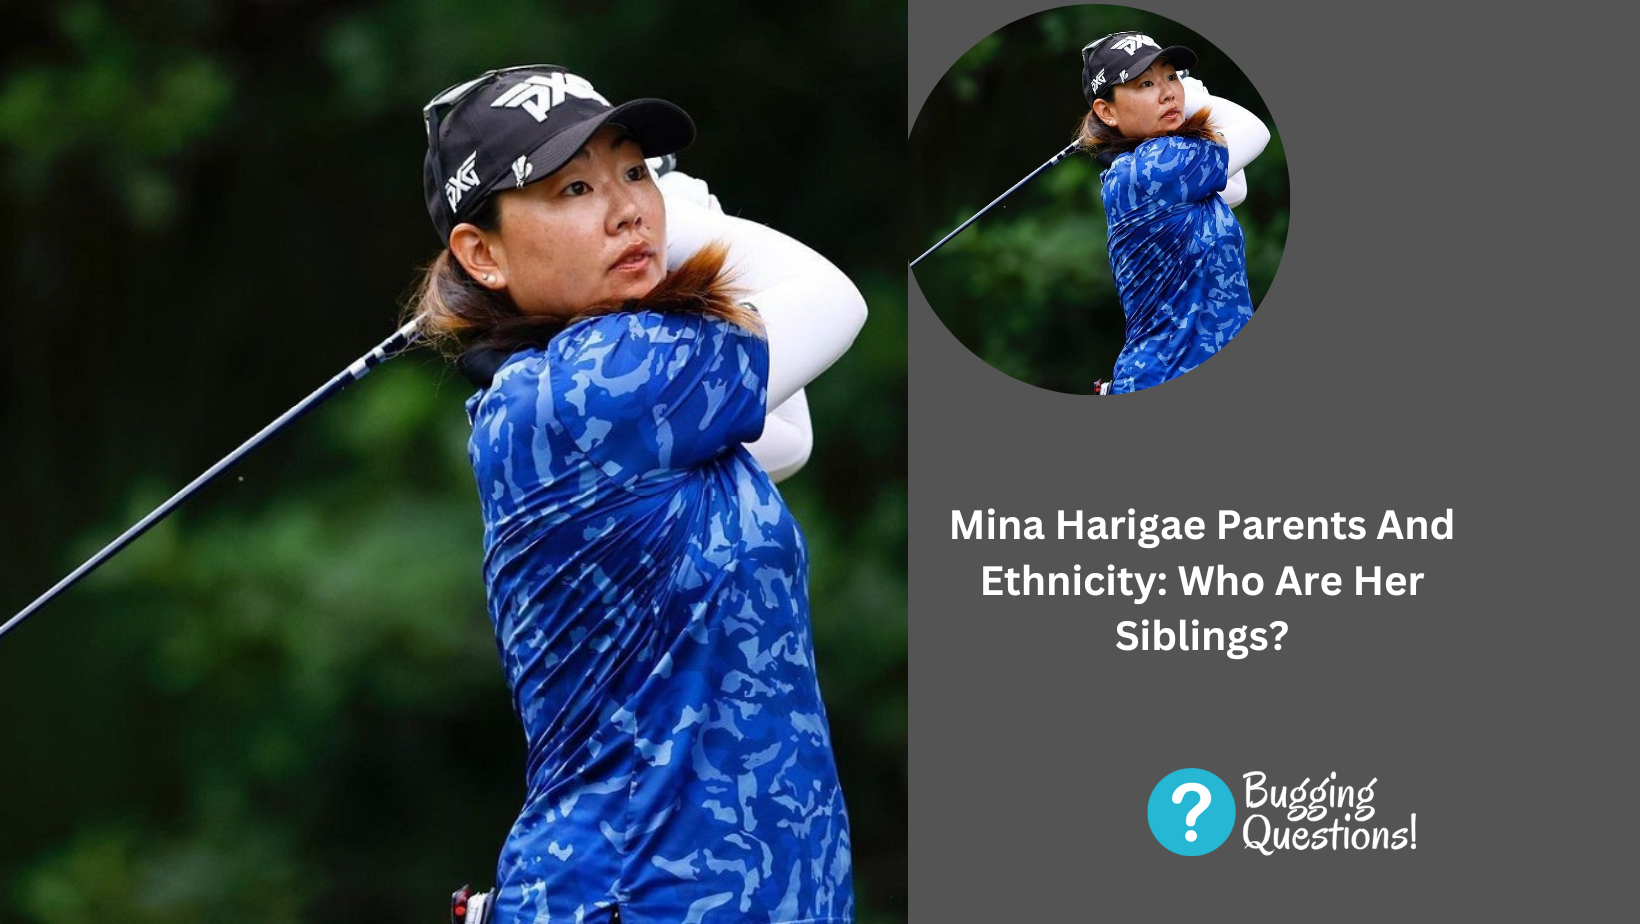 Mina Harigae Parents And Ethnicity: Who Are Her Siblings?